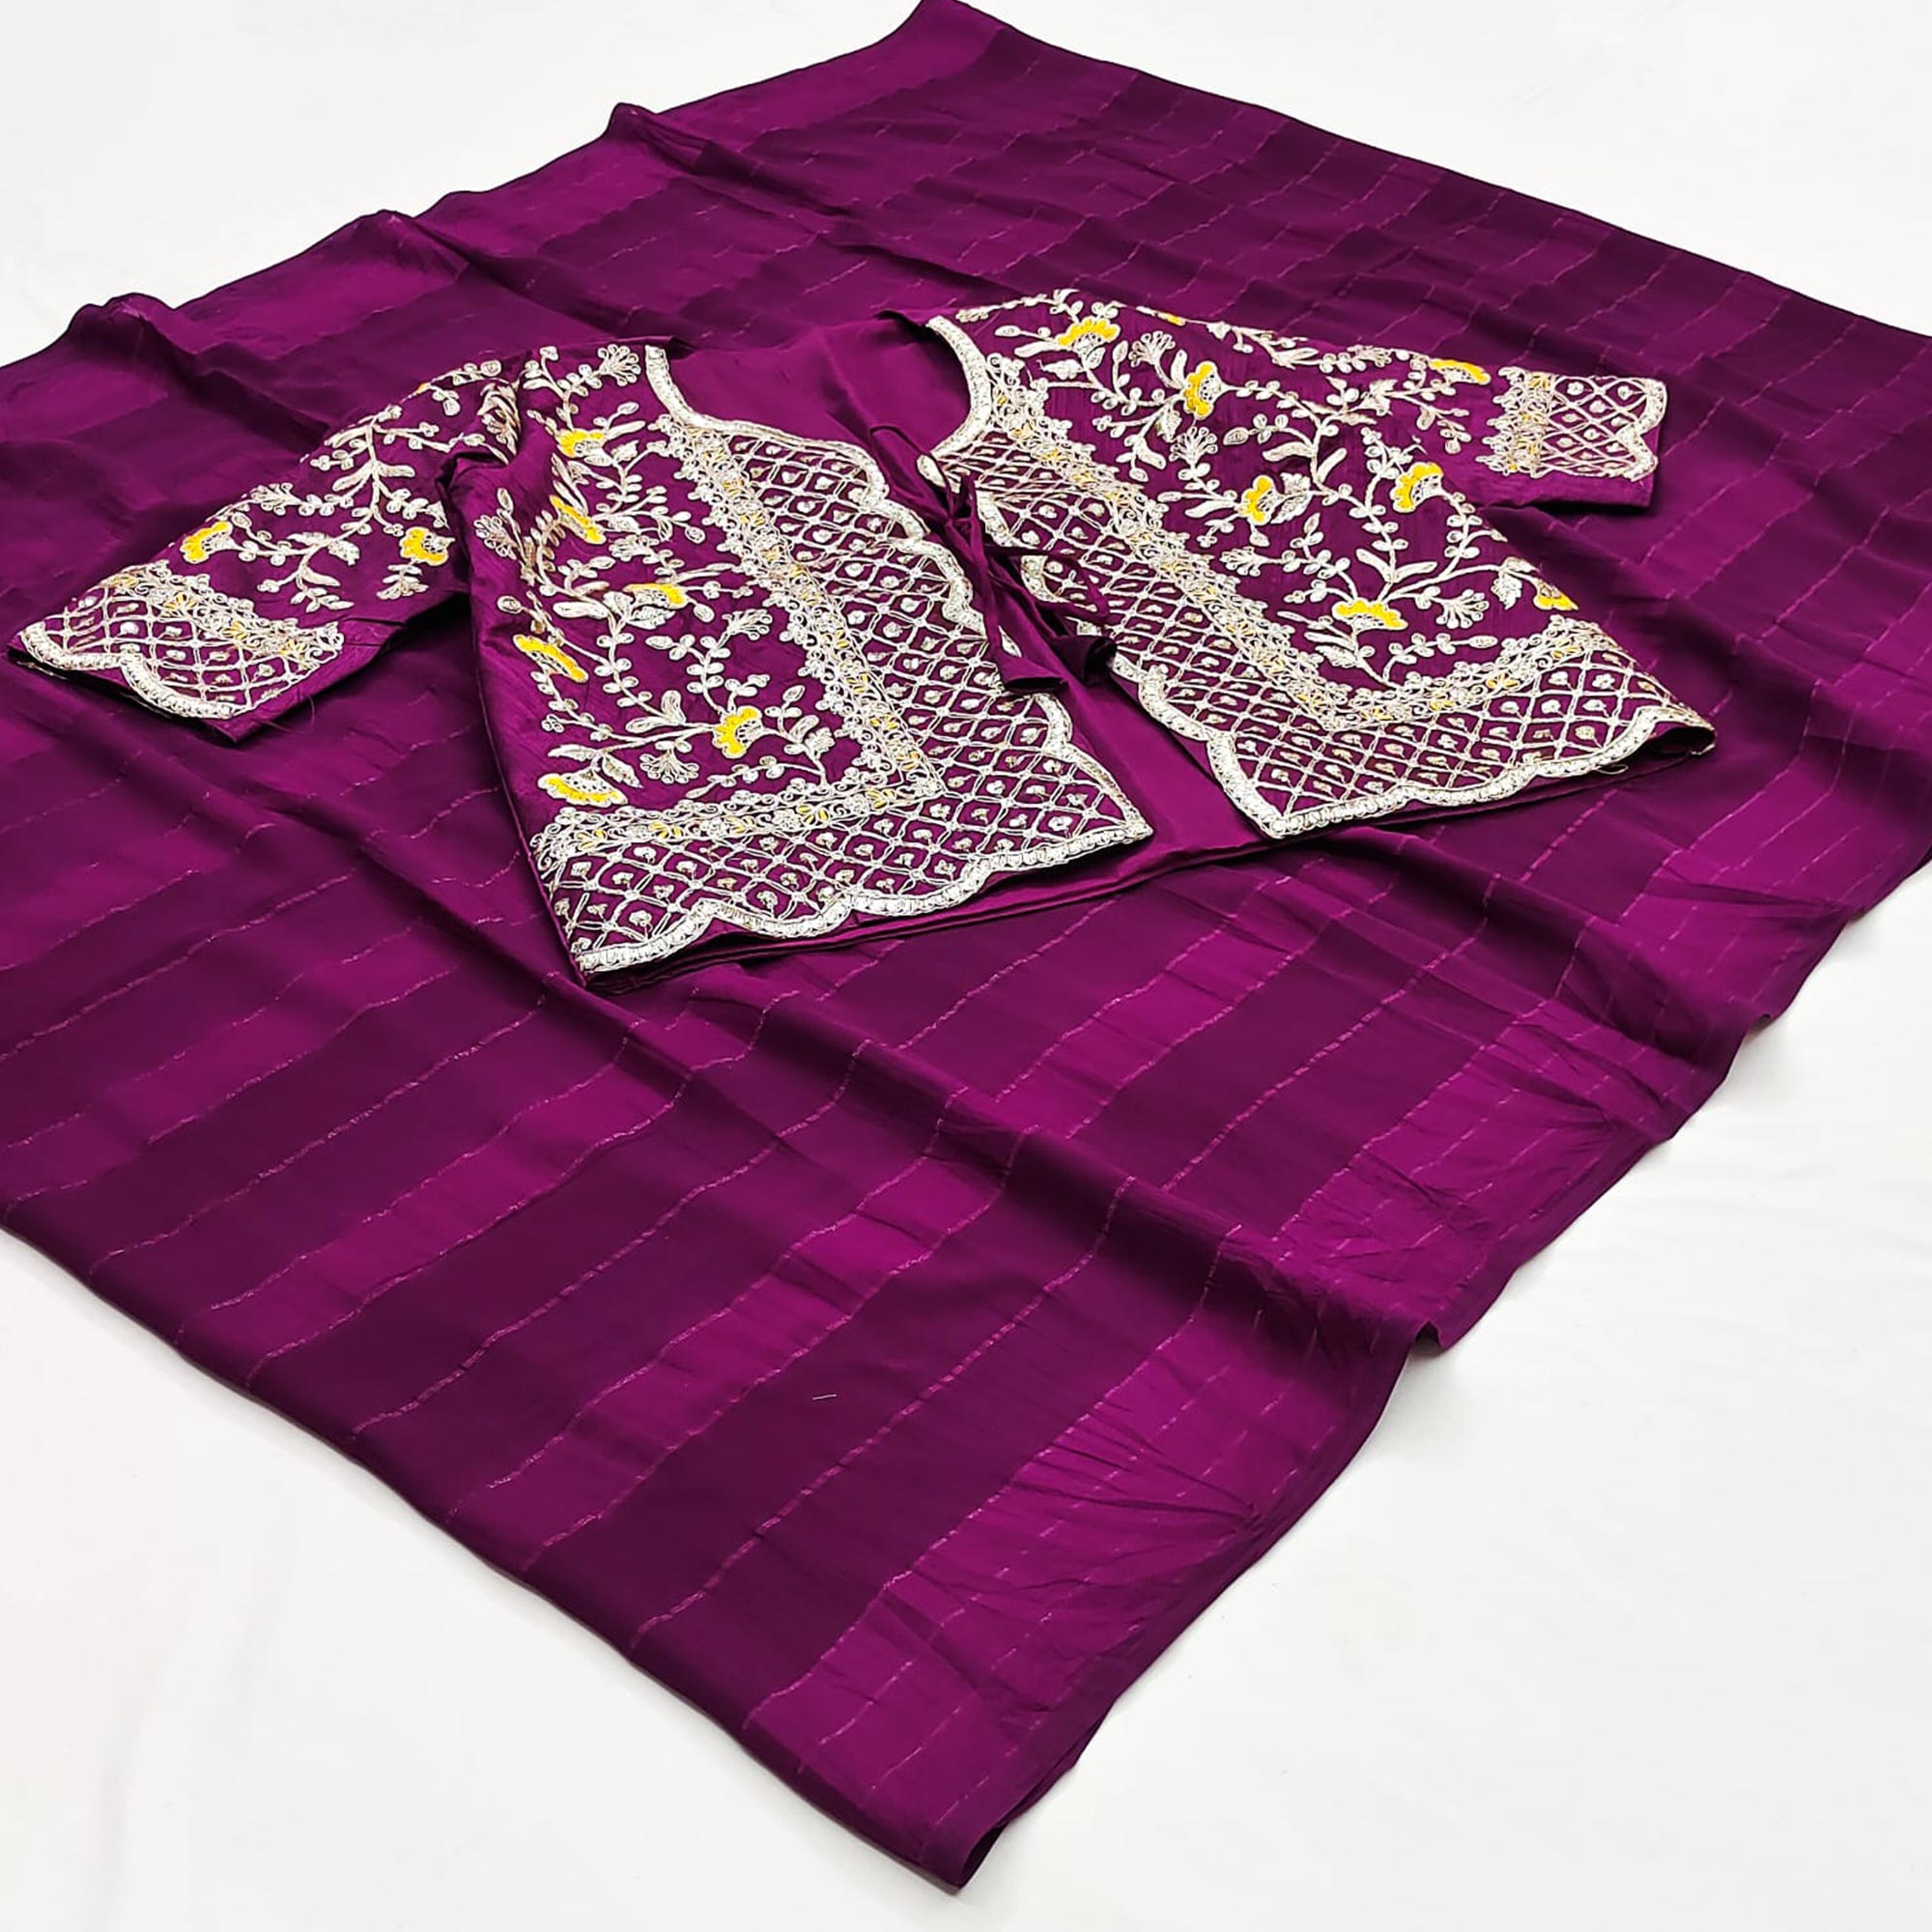 Purple Woven Georgette Saree With Embroidered Jacket